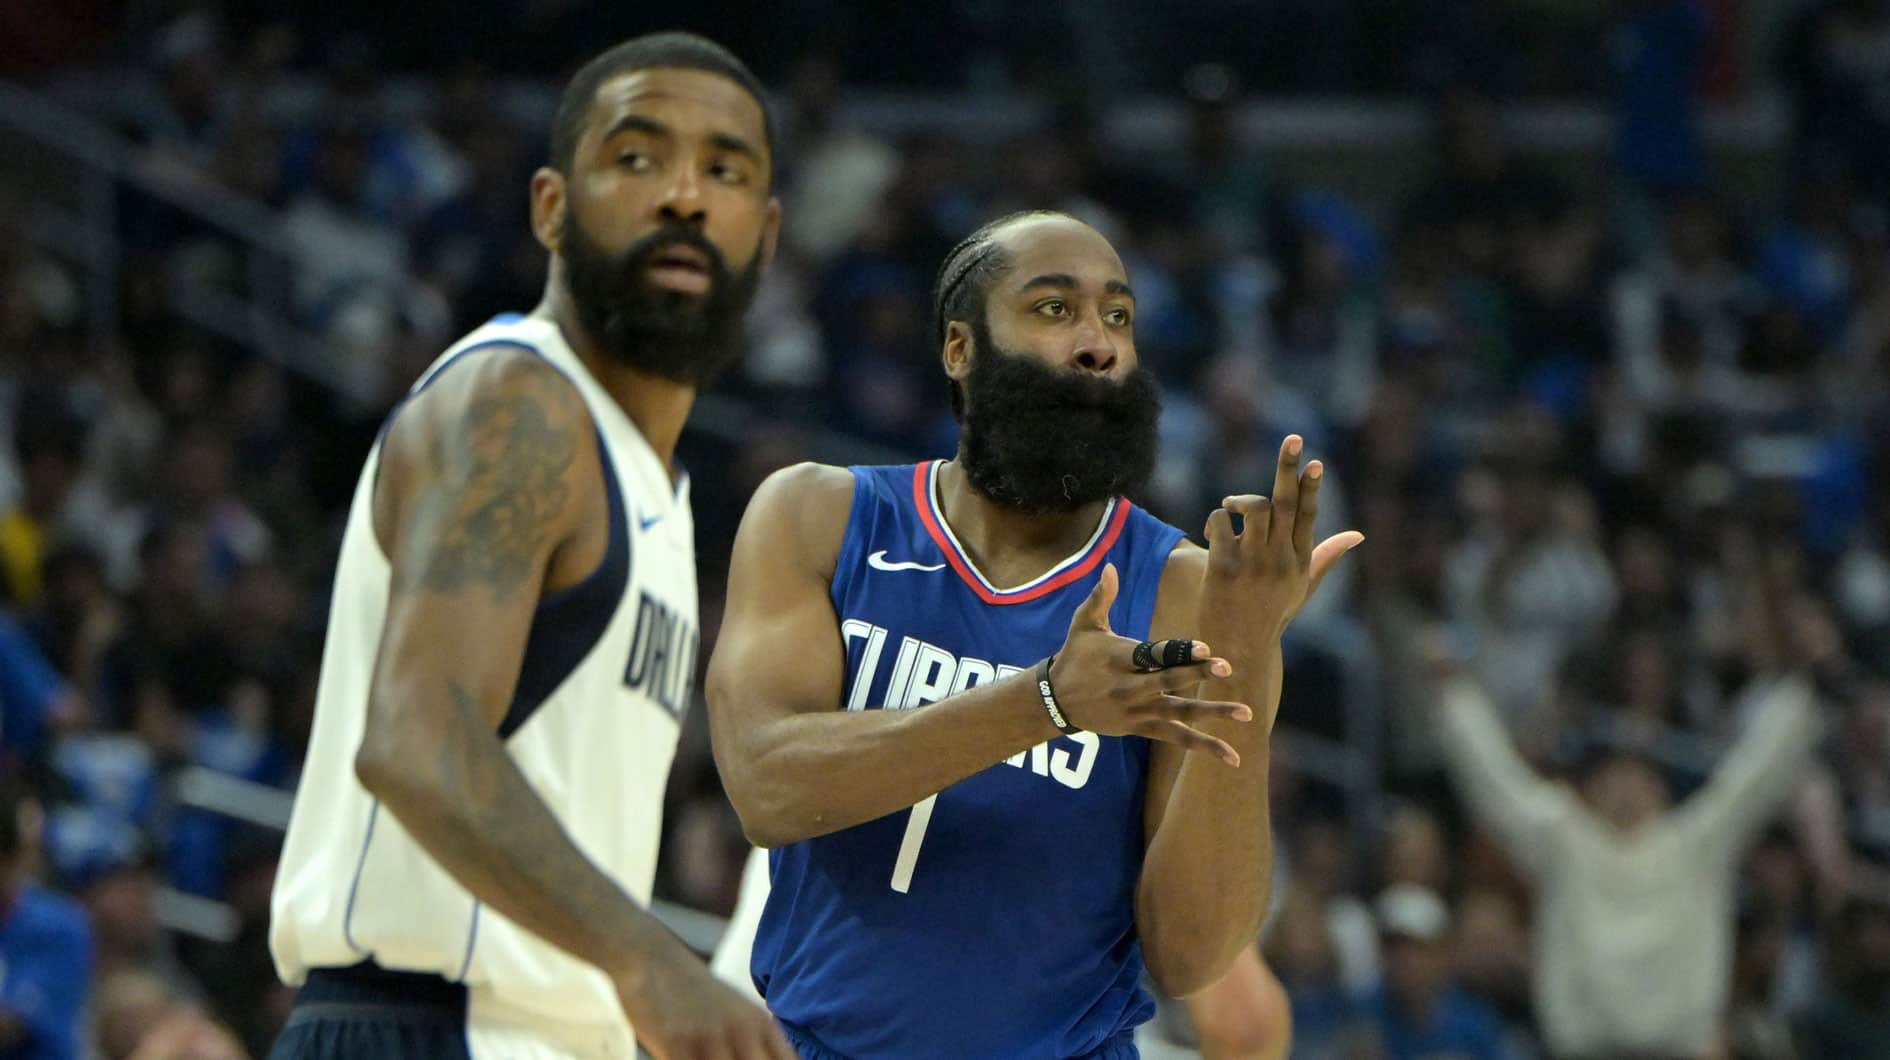 Los Angeles Clippers guard James Harden (1) signals after a 3-point basket over Dallas Mavericks guard Kyrie Irving (11) in the first half at Crypto.com Arena.